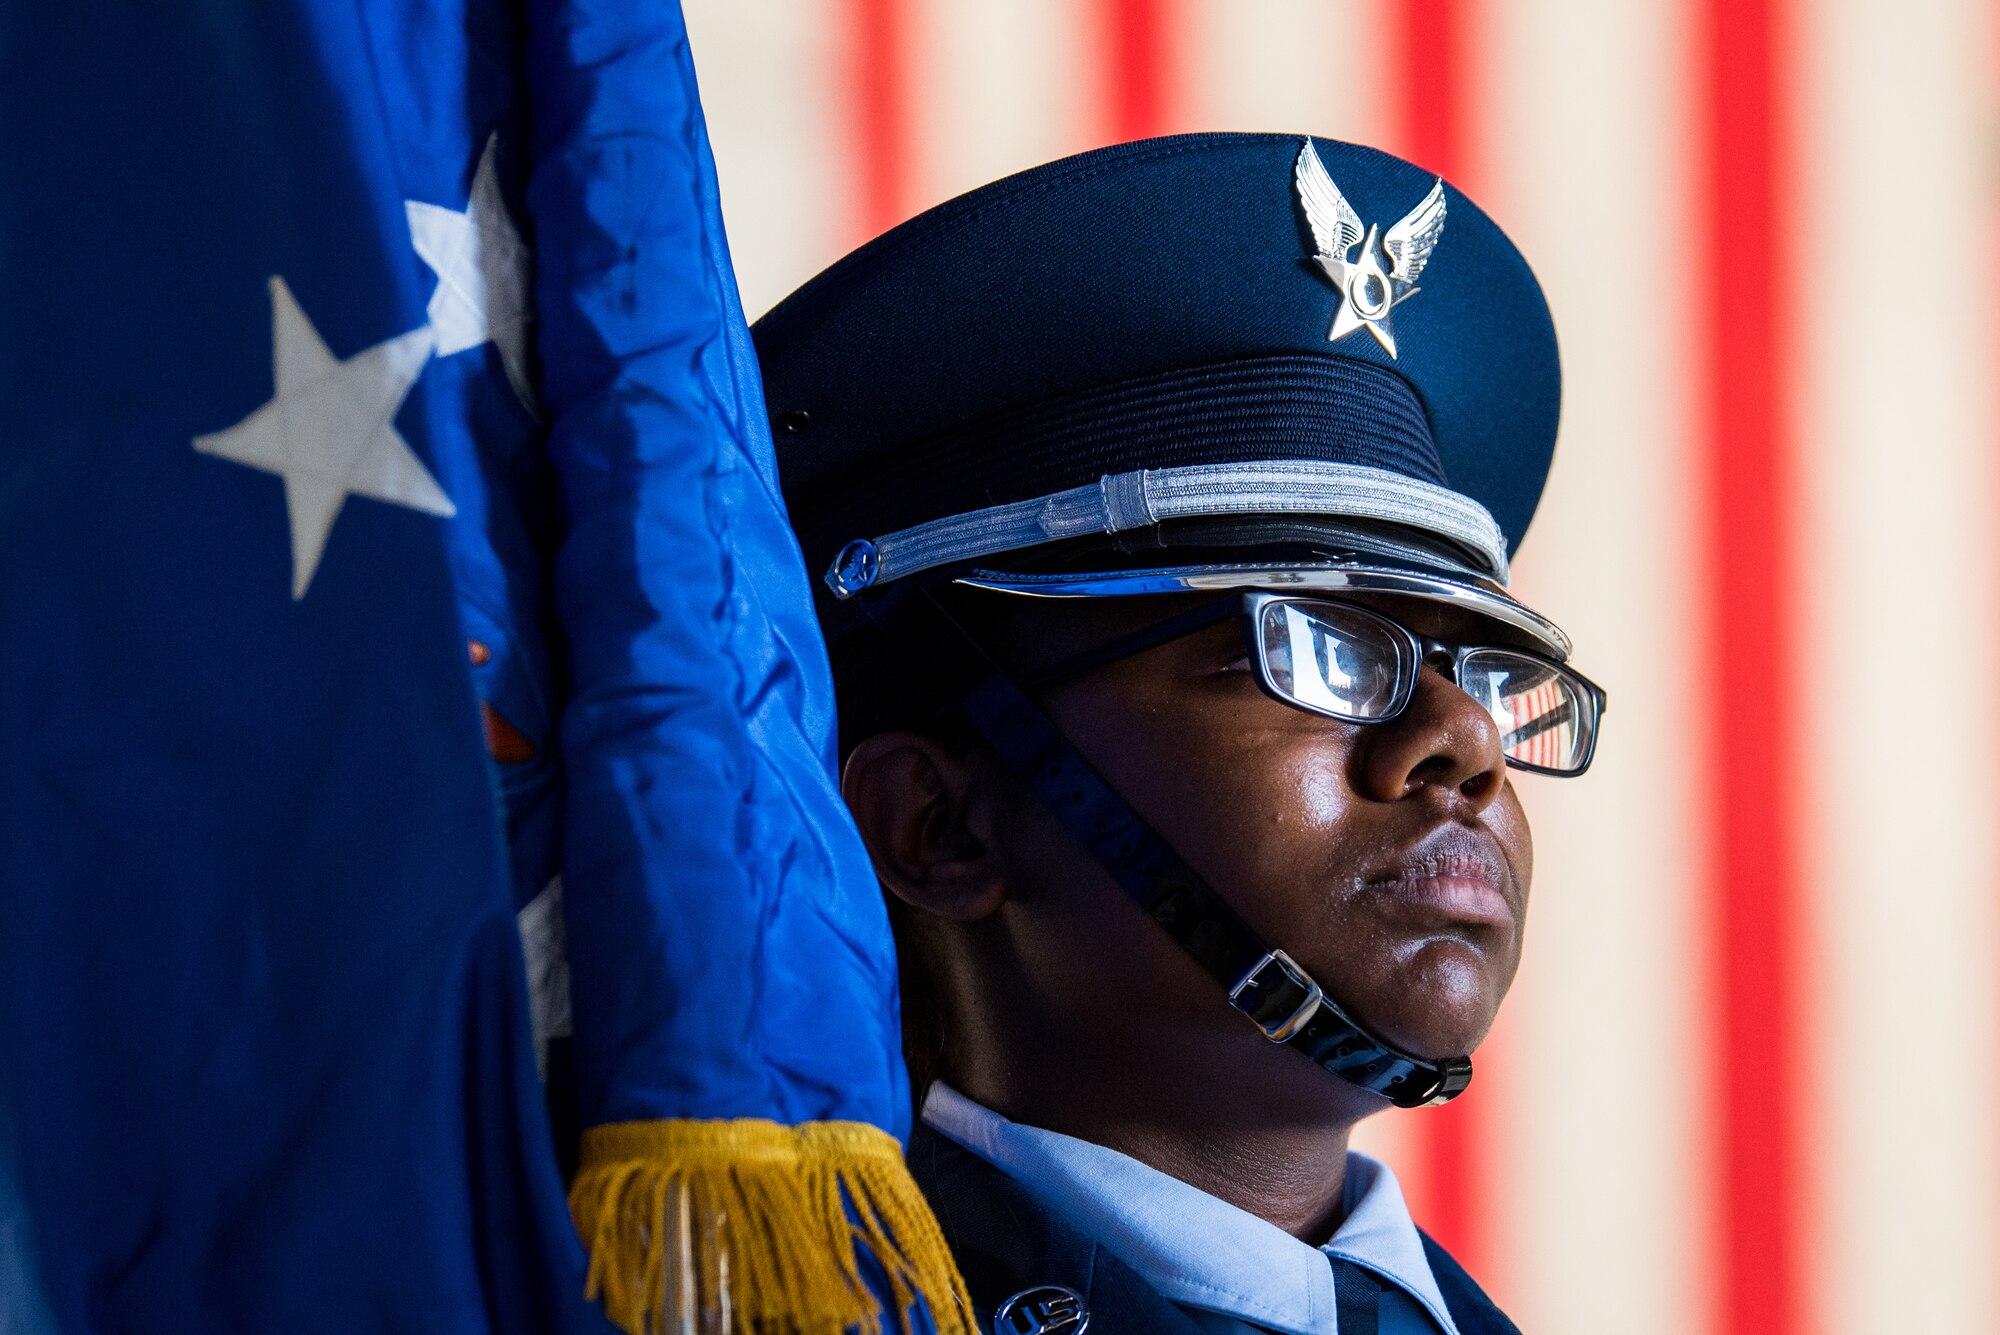 Airman 1st Class Myshanique Jones, Travis Air Force Base Honor Guard, holds the Air Force flag during the 75th anniversary kickoff celebration at Travis AFB, Calif., Feb. 8, 2018. Travis AFB is celebrating 75 years as a major strategic logistics hub for the Pacific and integral part of global power projection for the total force. (U.S. Air Force photo by Master Sgt. Joey Swafford)